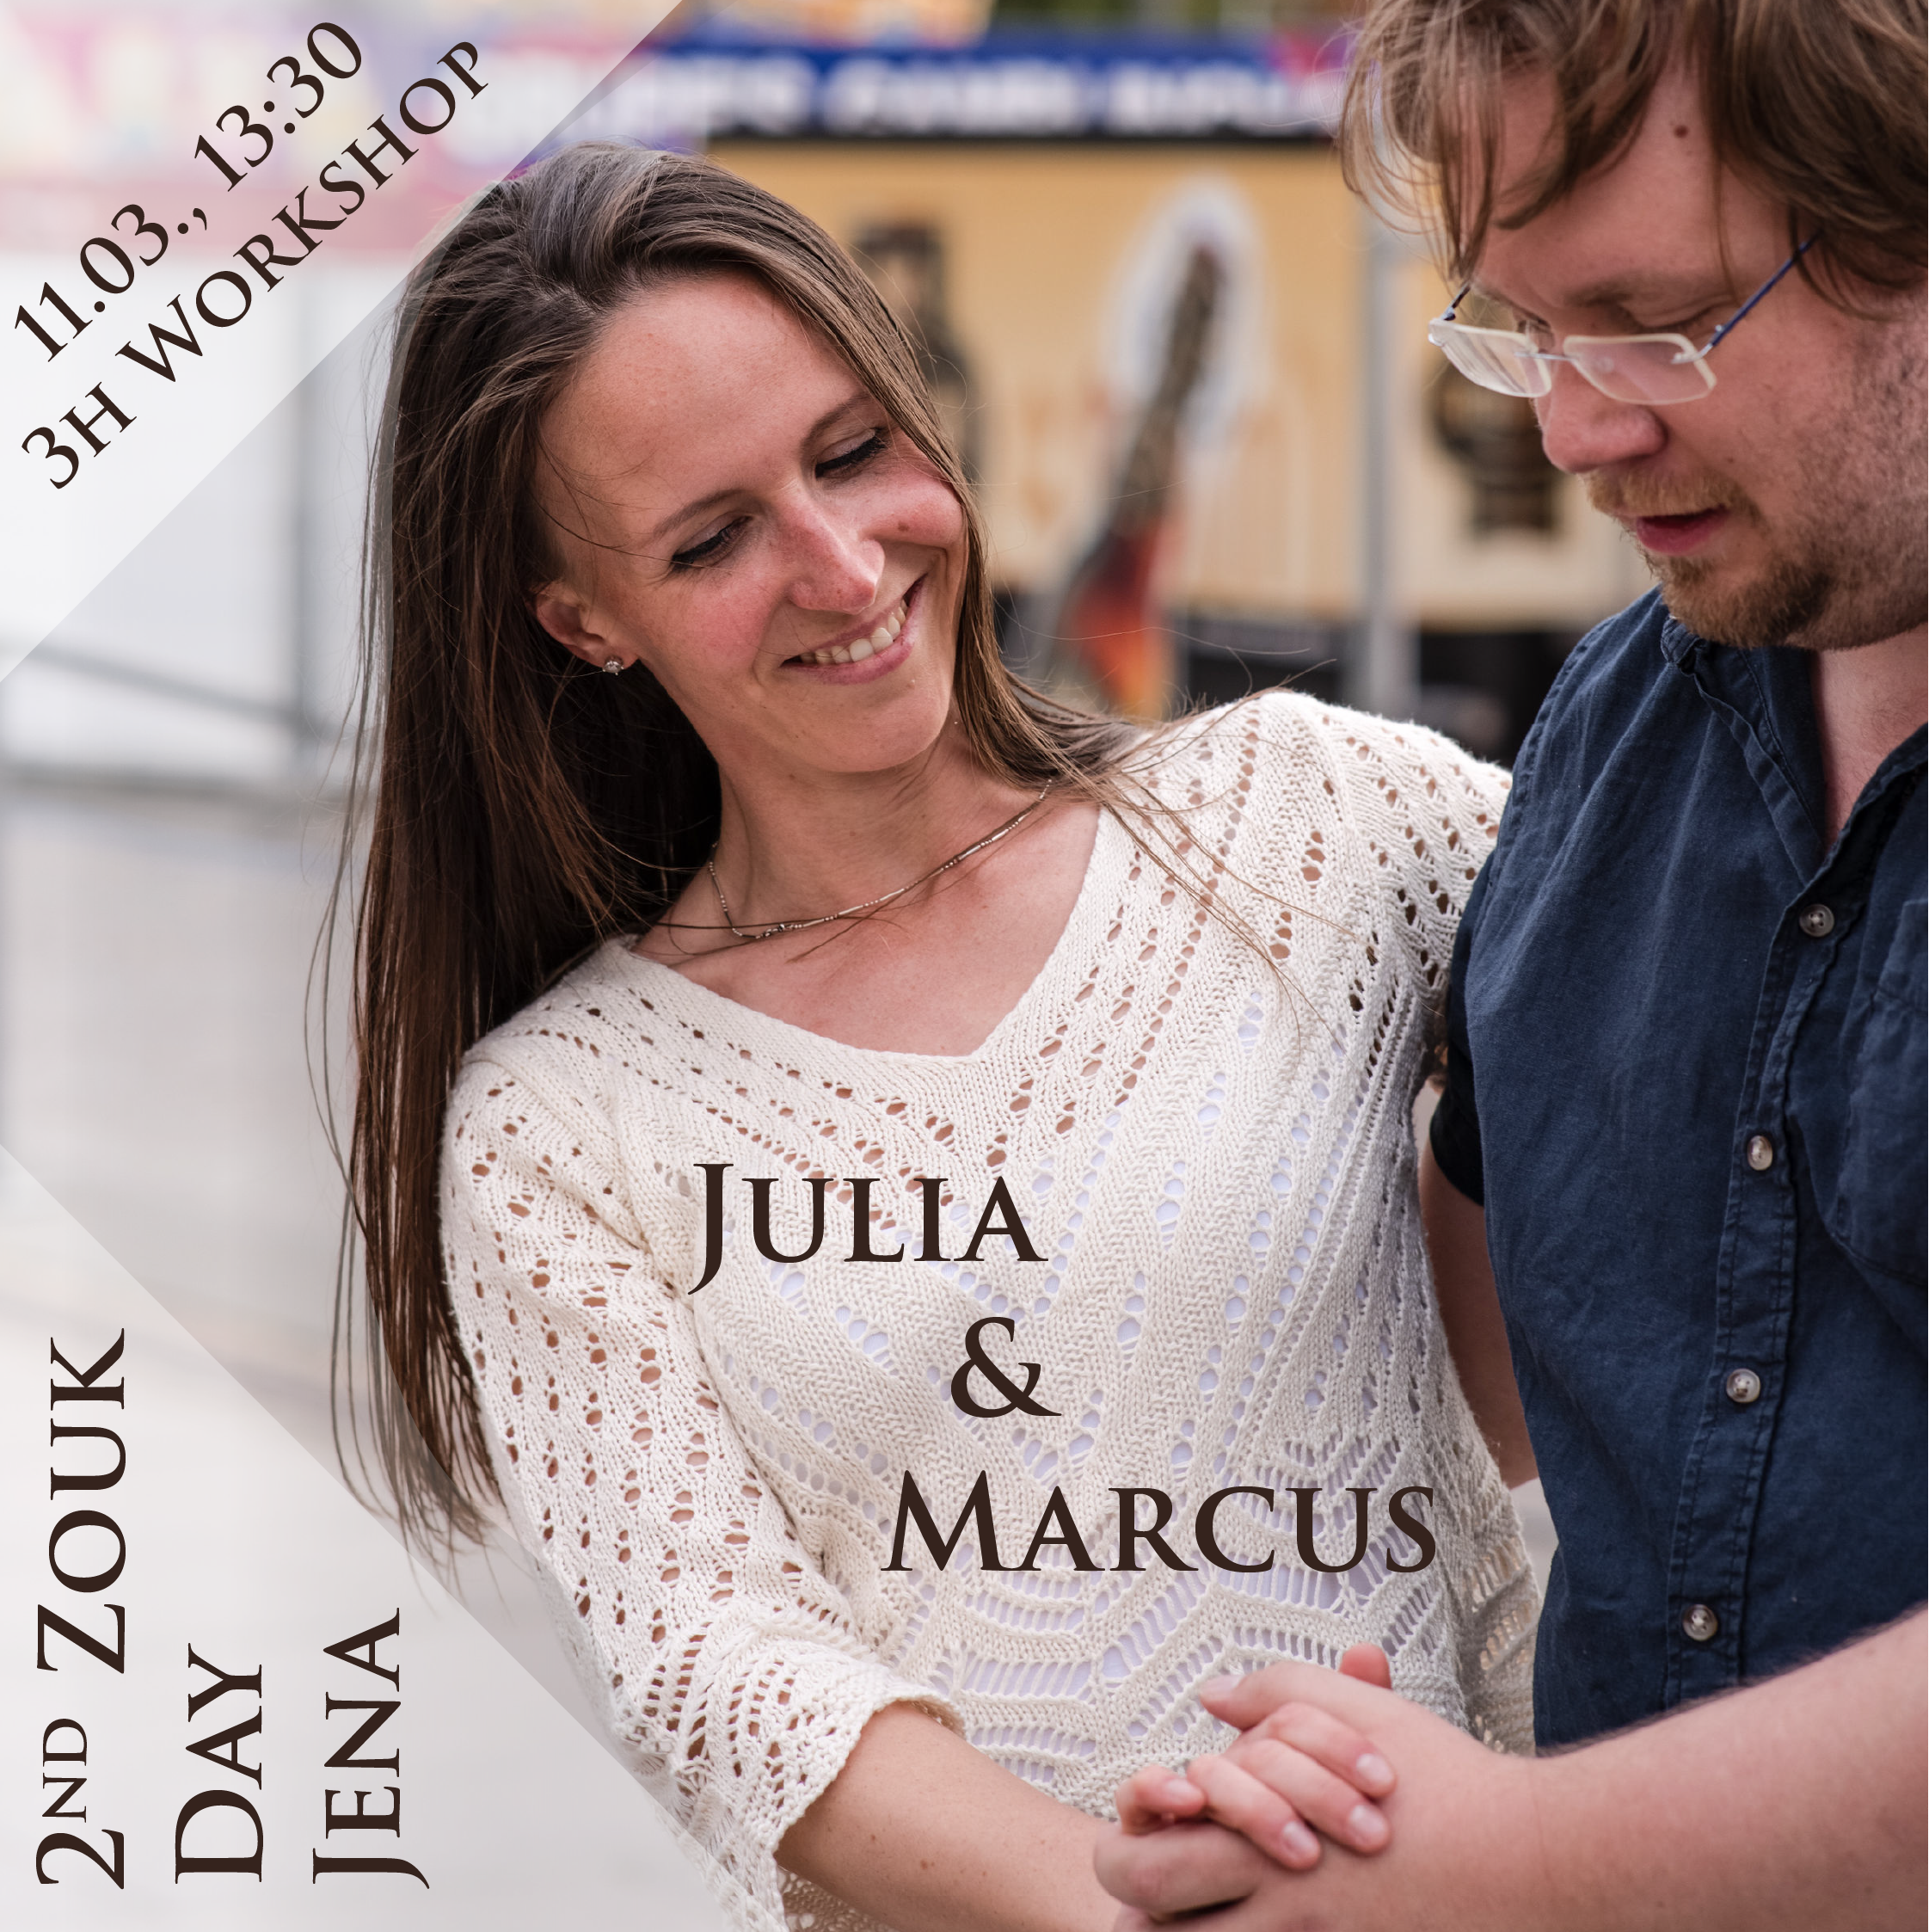 You are currently viewing Zouk Day Jena – Julia & Marcus